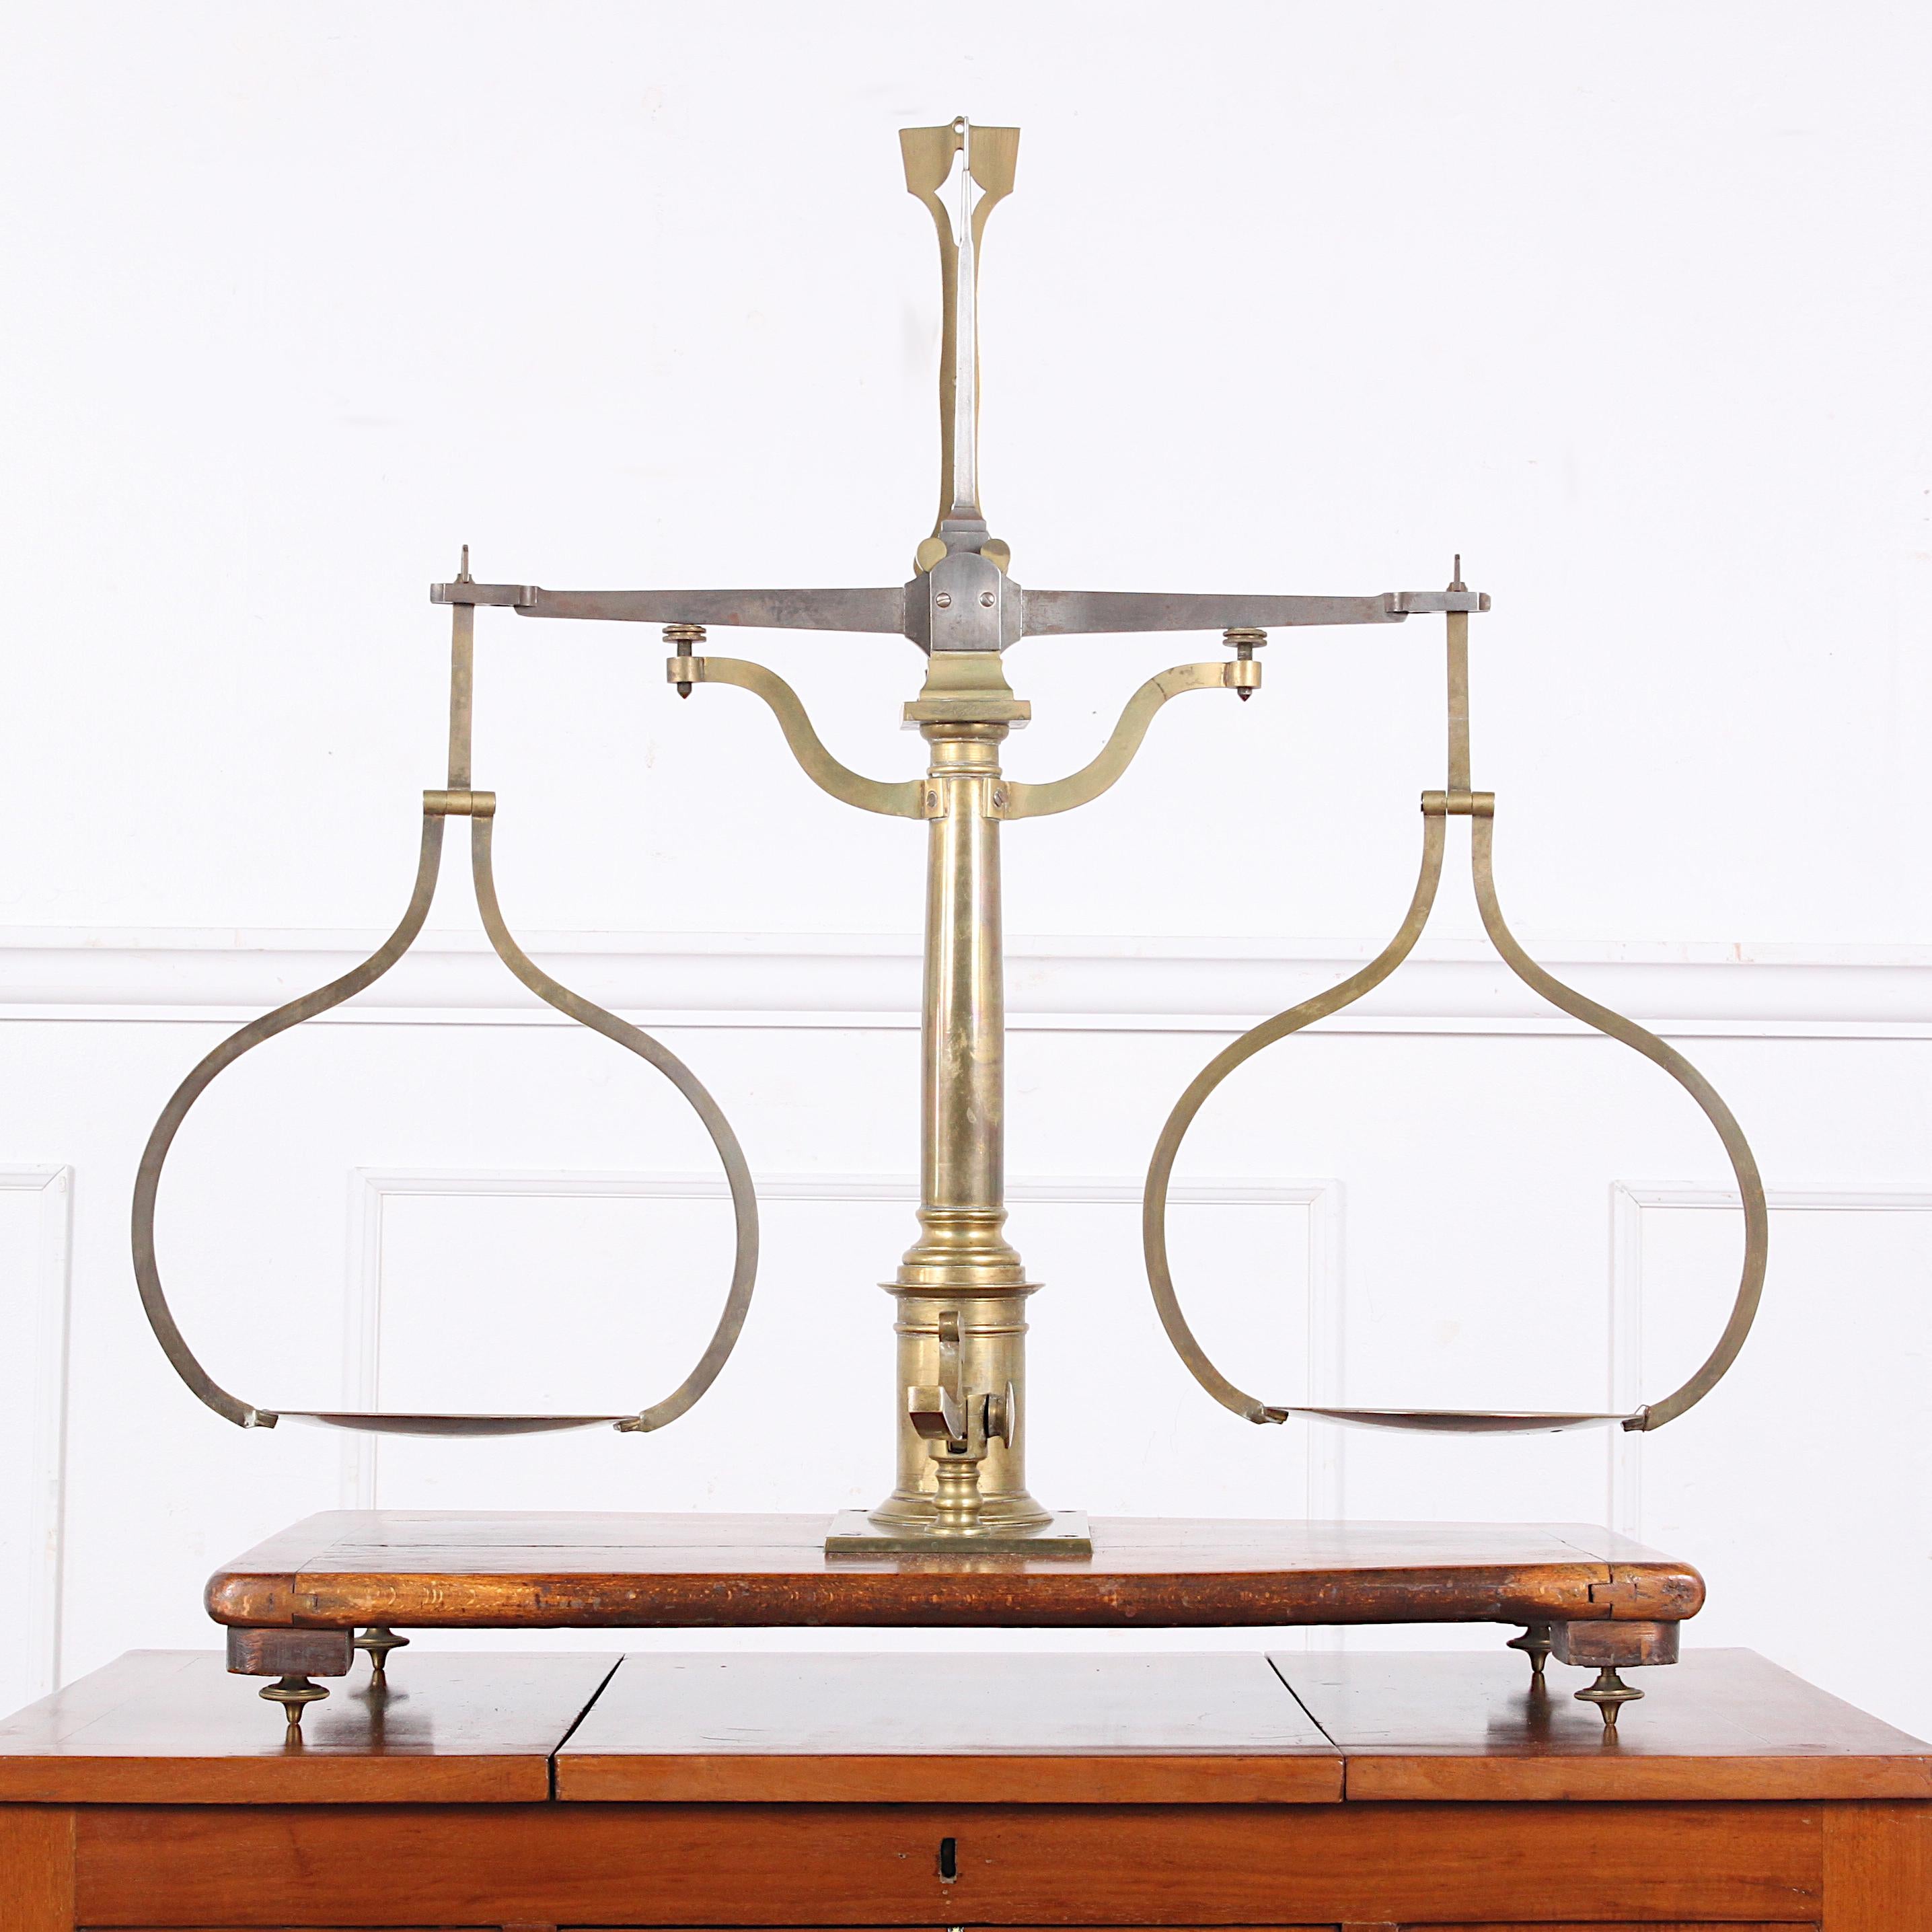 A handsome 19th century brass balance scale on a wooden stand and with a set of weights.